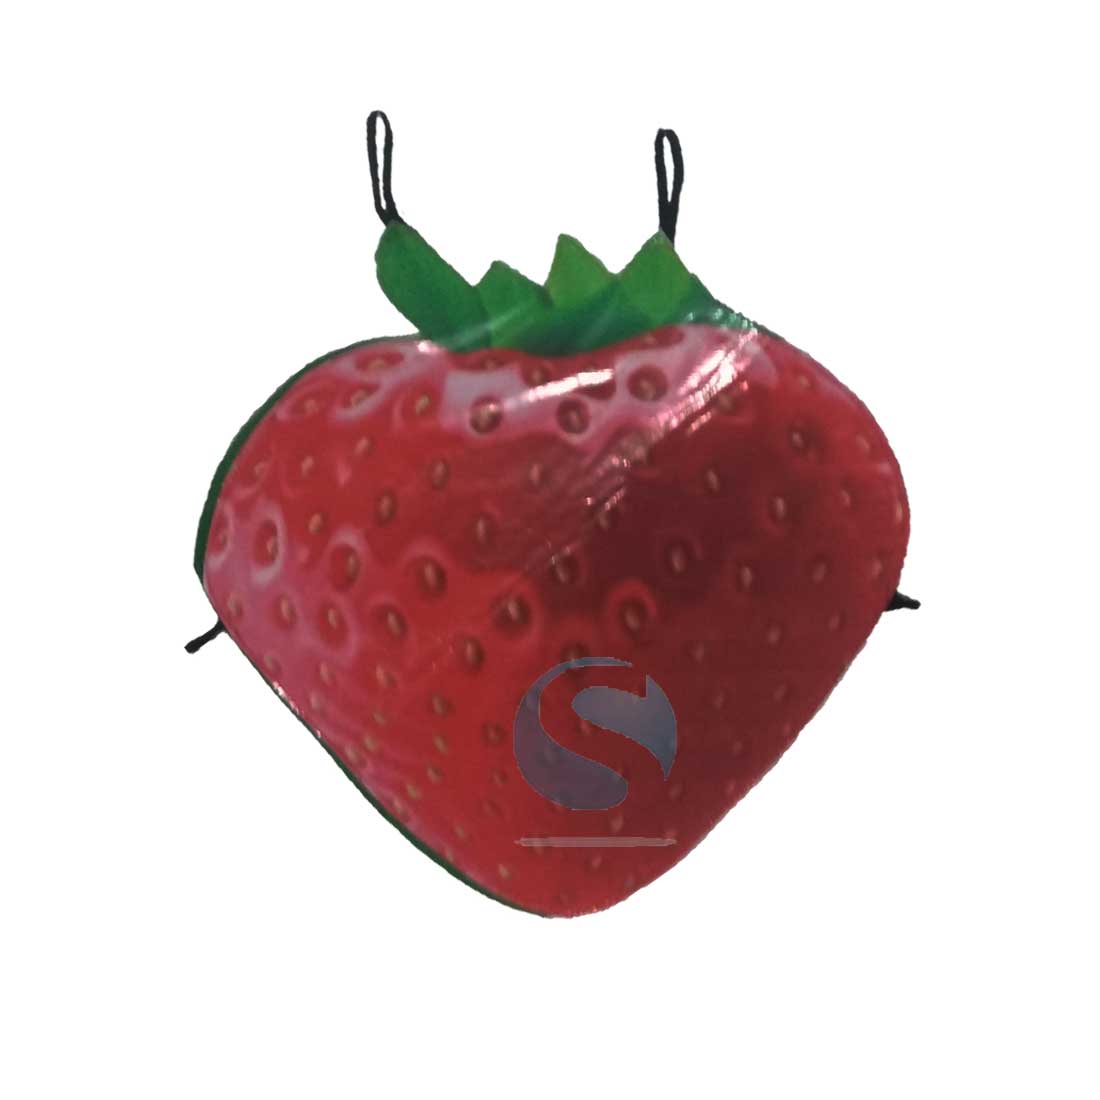 Halloweencostumes.com Strawberry Bubble Costume For An Toddler : Target